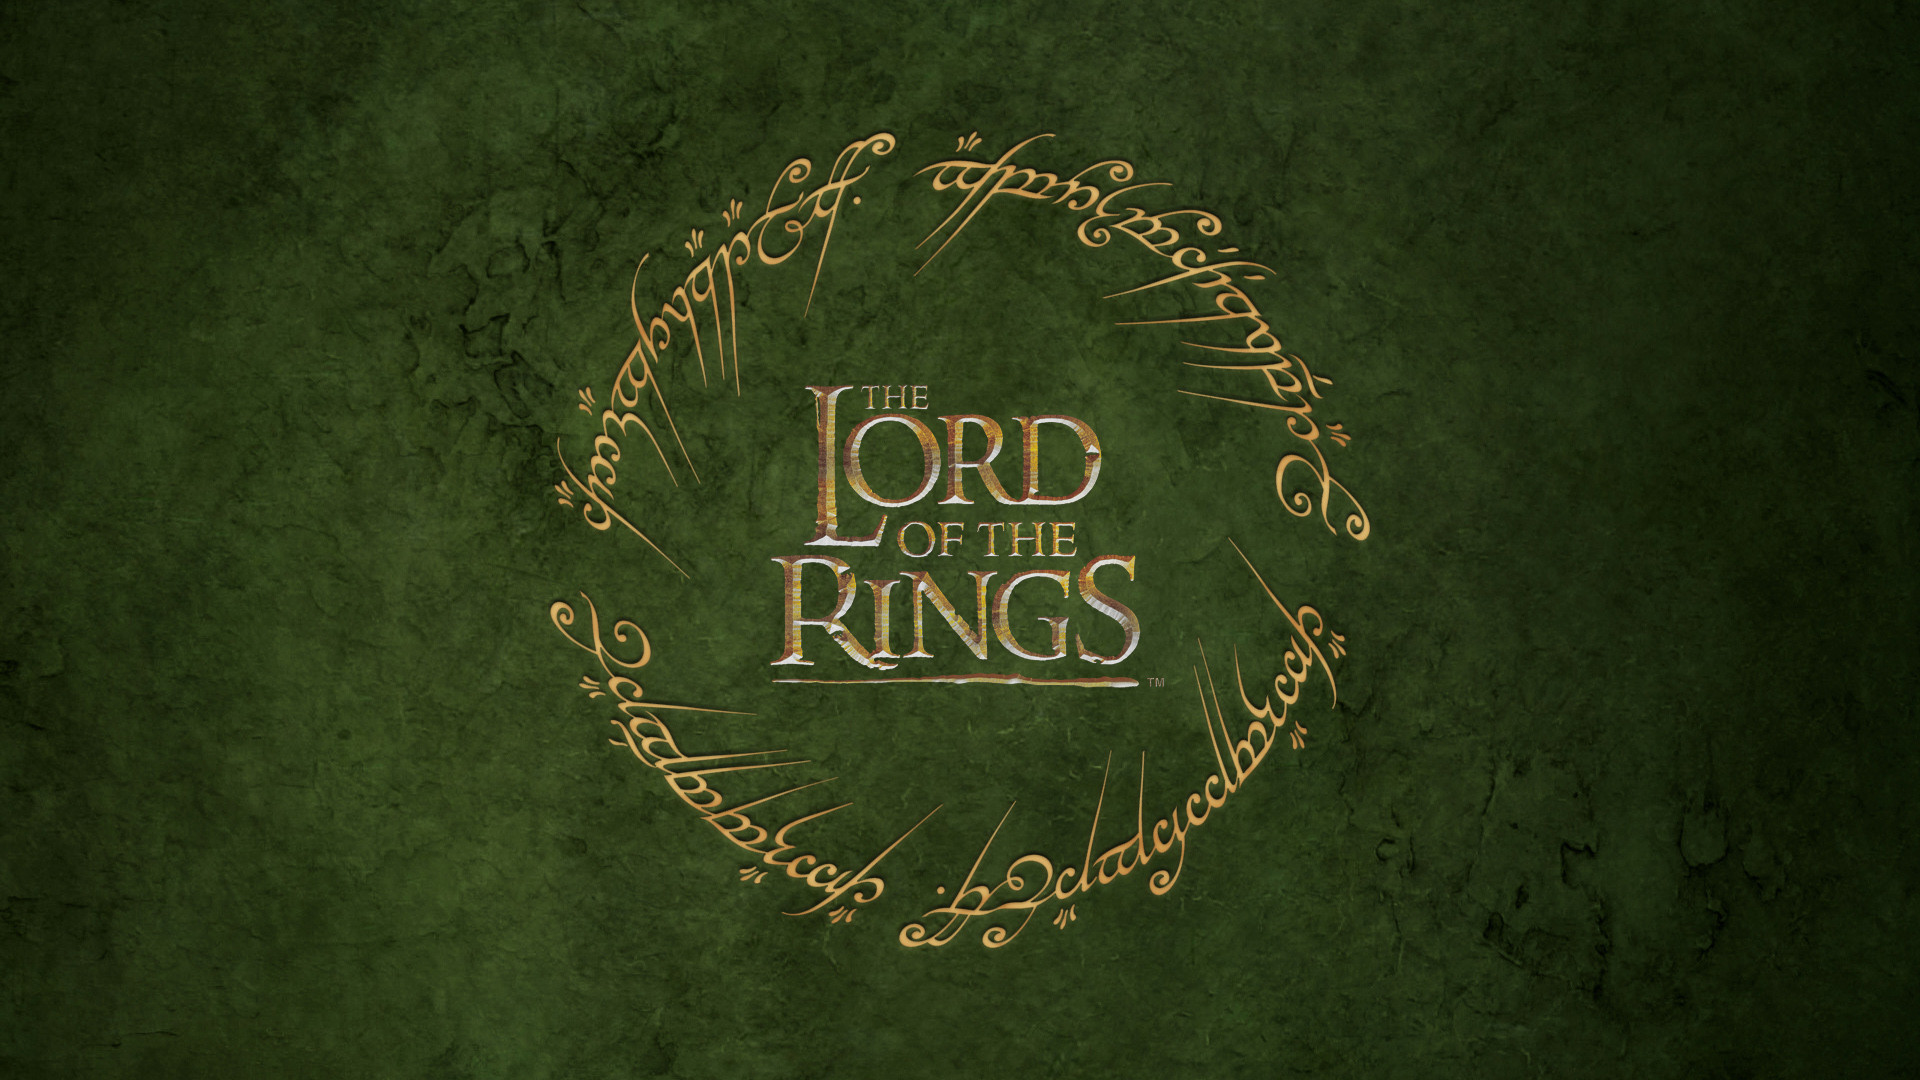 The Lord of the Rings Wallpaper.